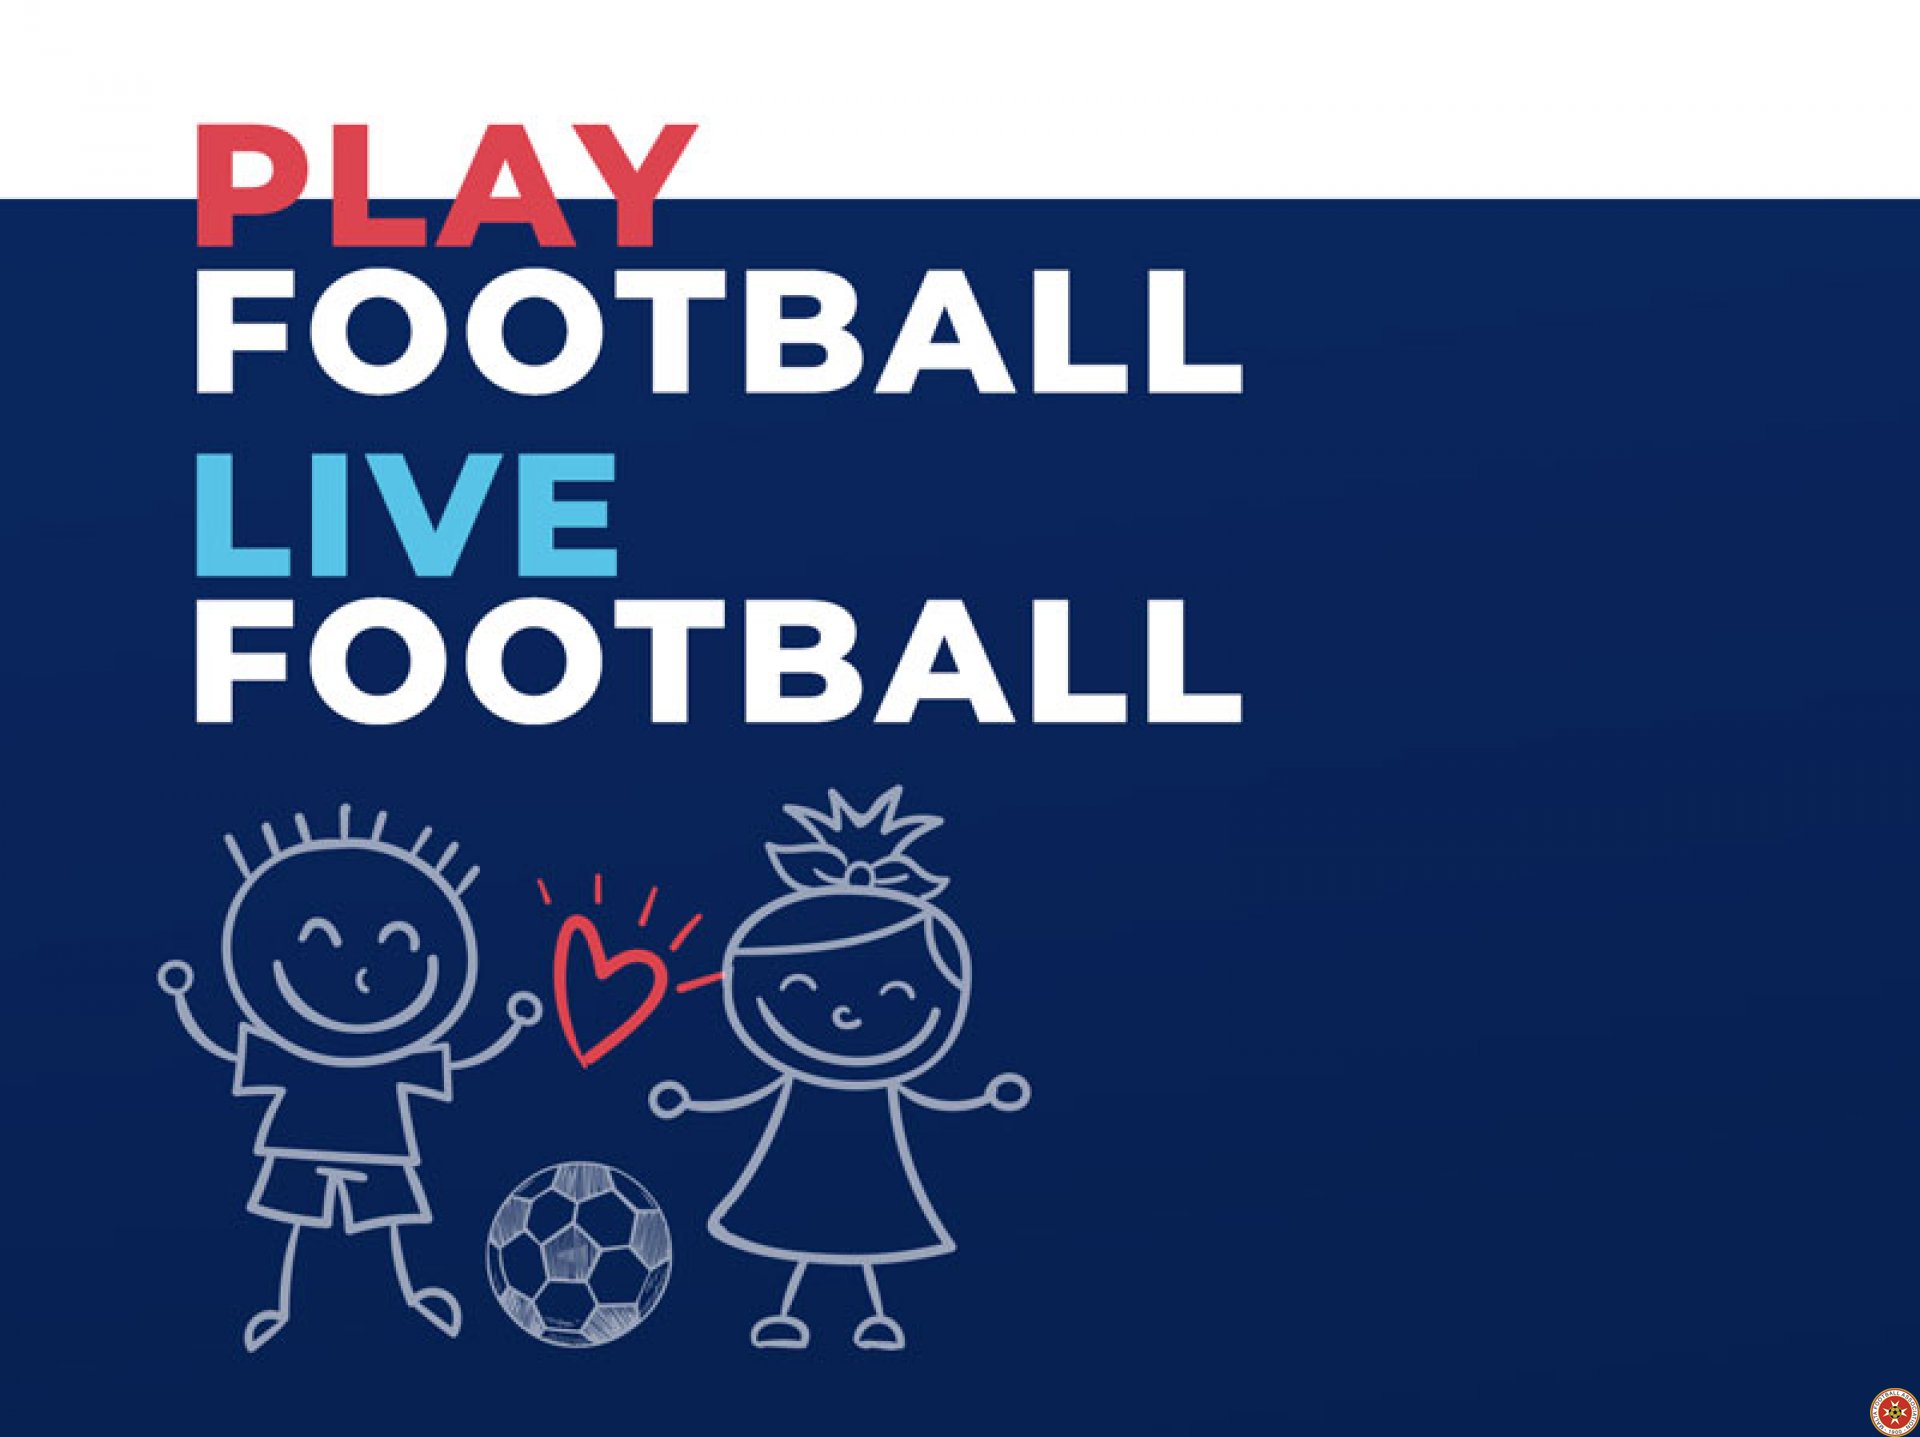 Play Football Live Football promotes inclusion of refugees